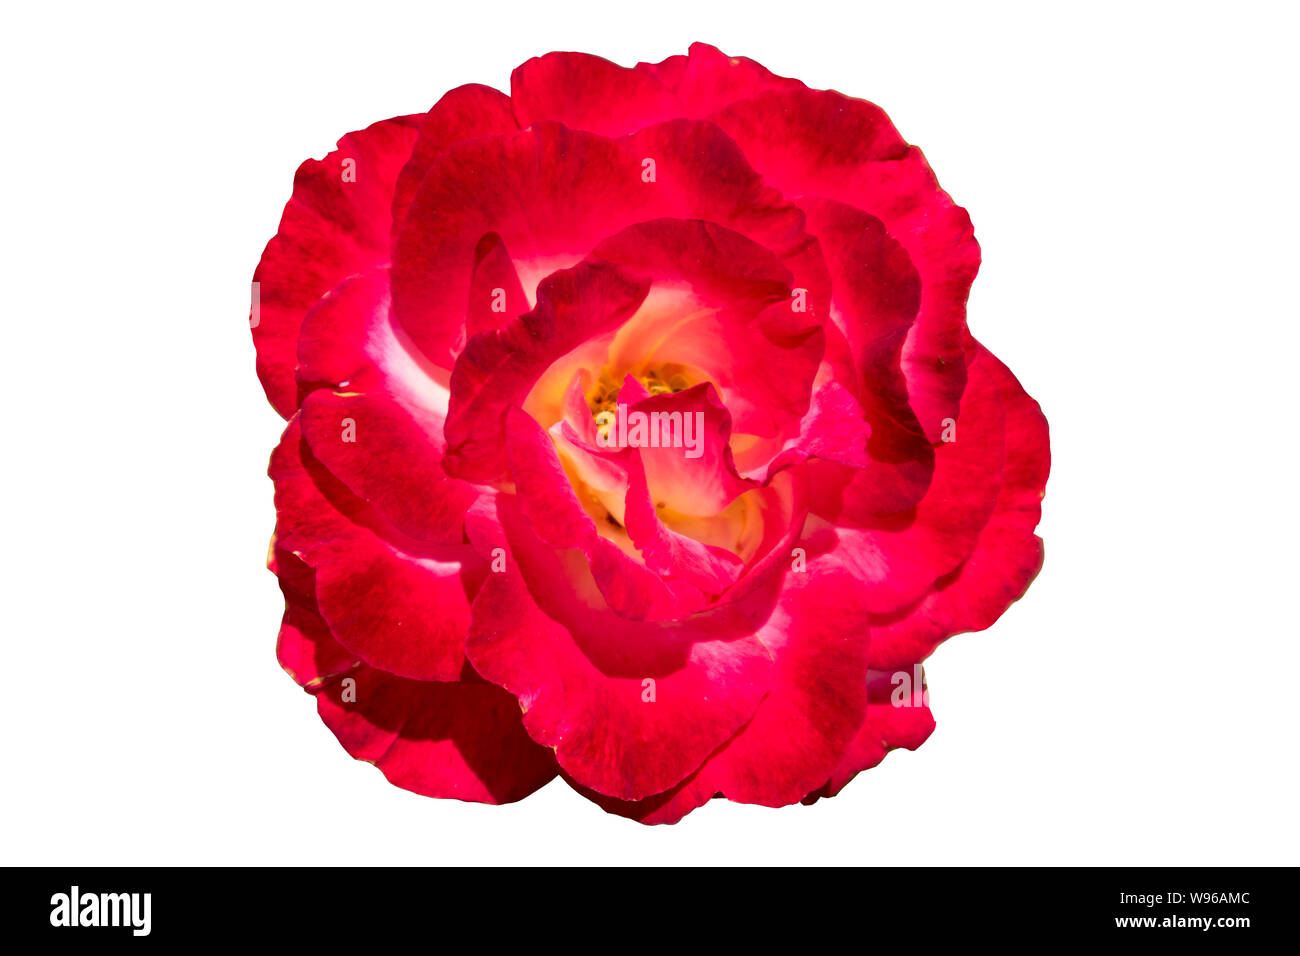 One 'Rosa gallica maxima' rose red flower isolated on white. Stock Photo